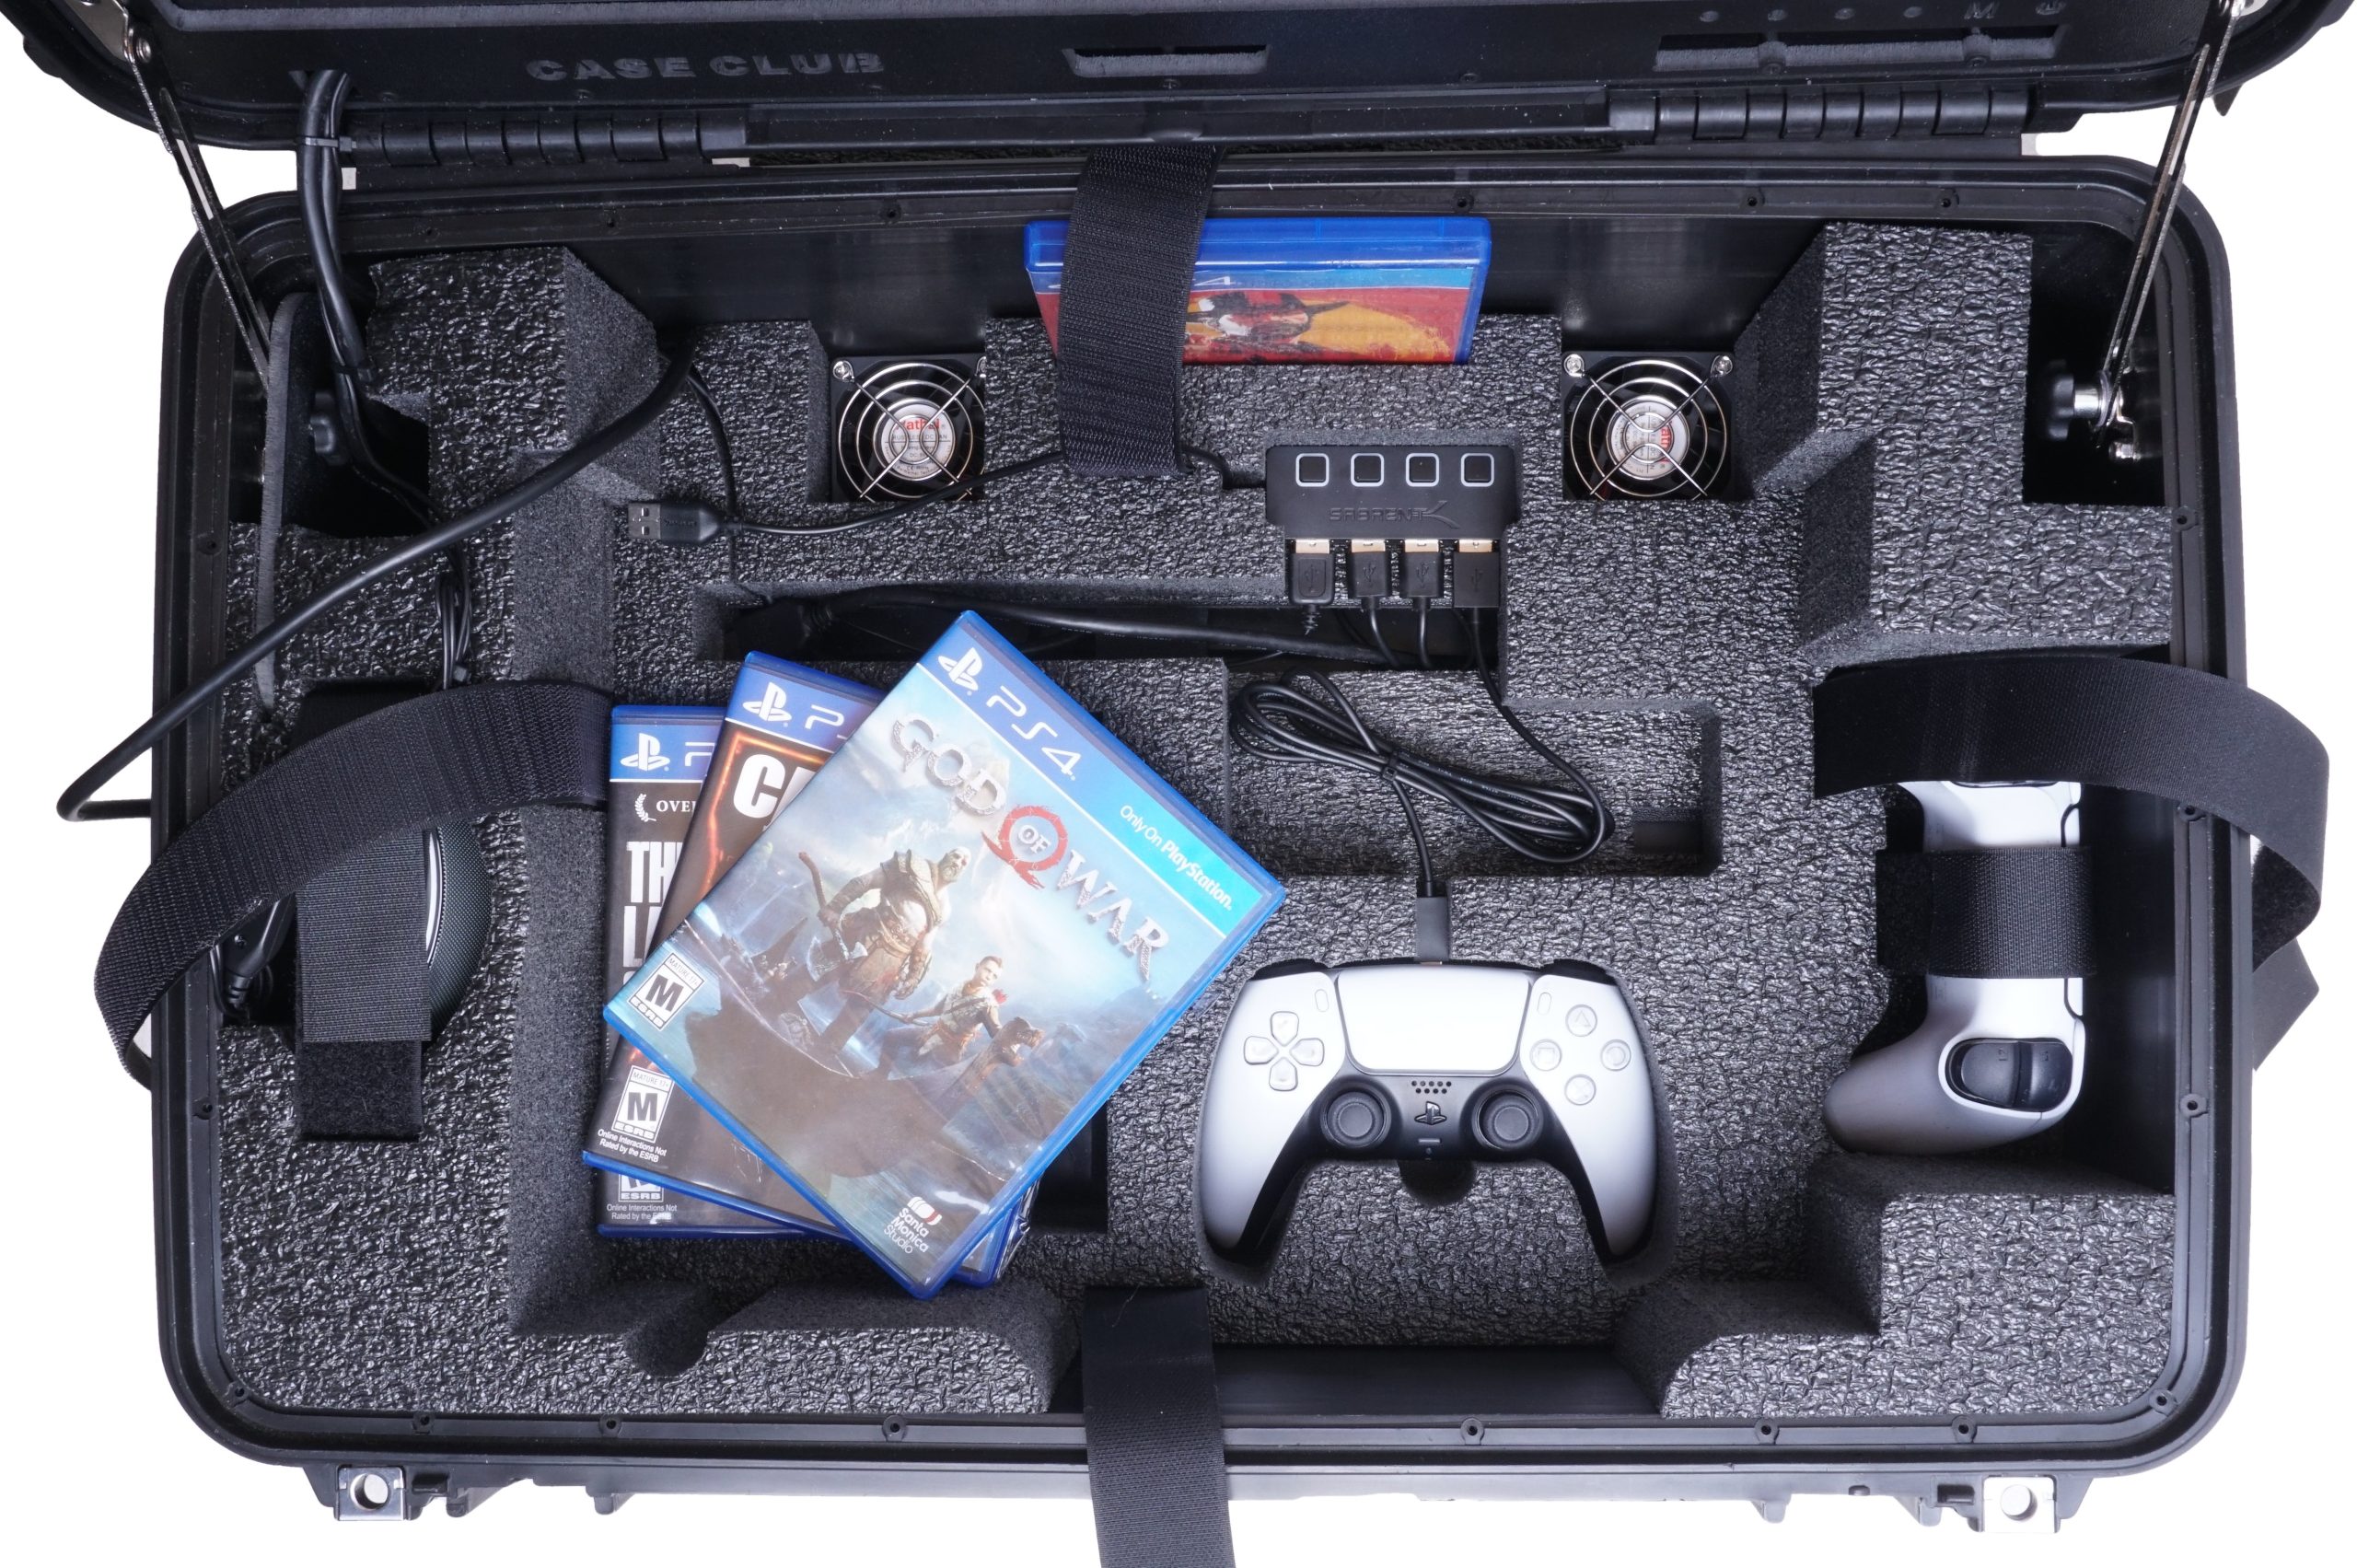 PlayStation 5 Portable Gaming Station with Built-in Monitor - Case